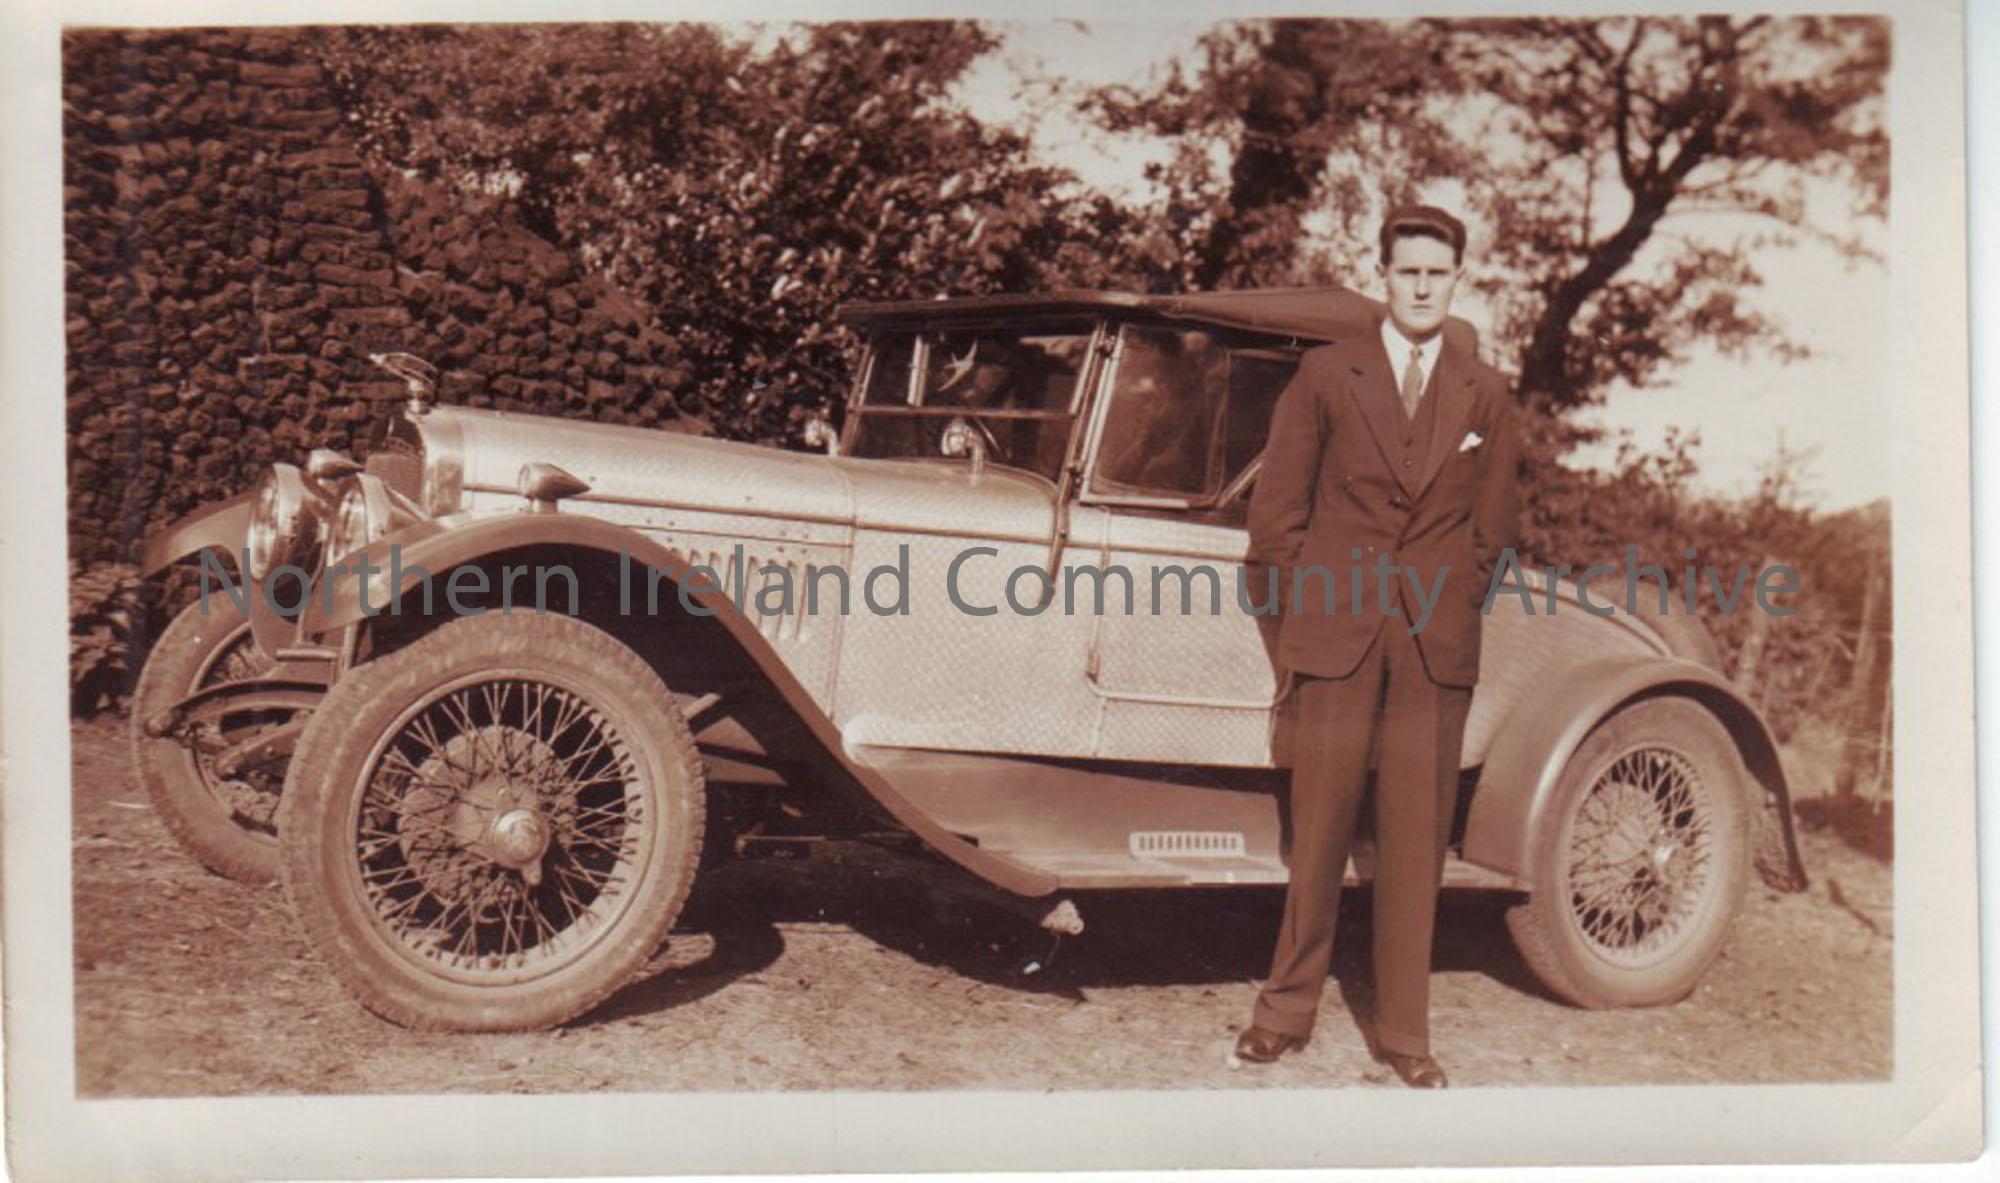 Robert McLean standing by his ‘Star’ car. This car is believed to have raced in the Ulster TT race, before being purchased by McLean.